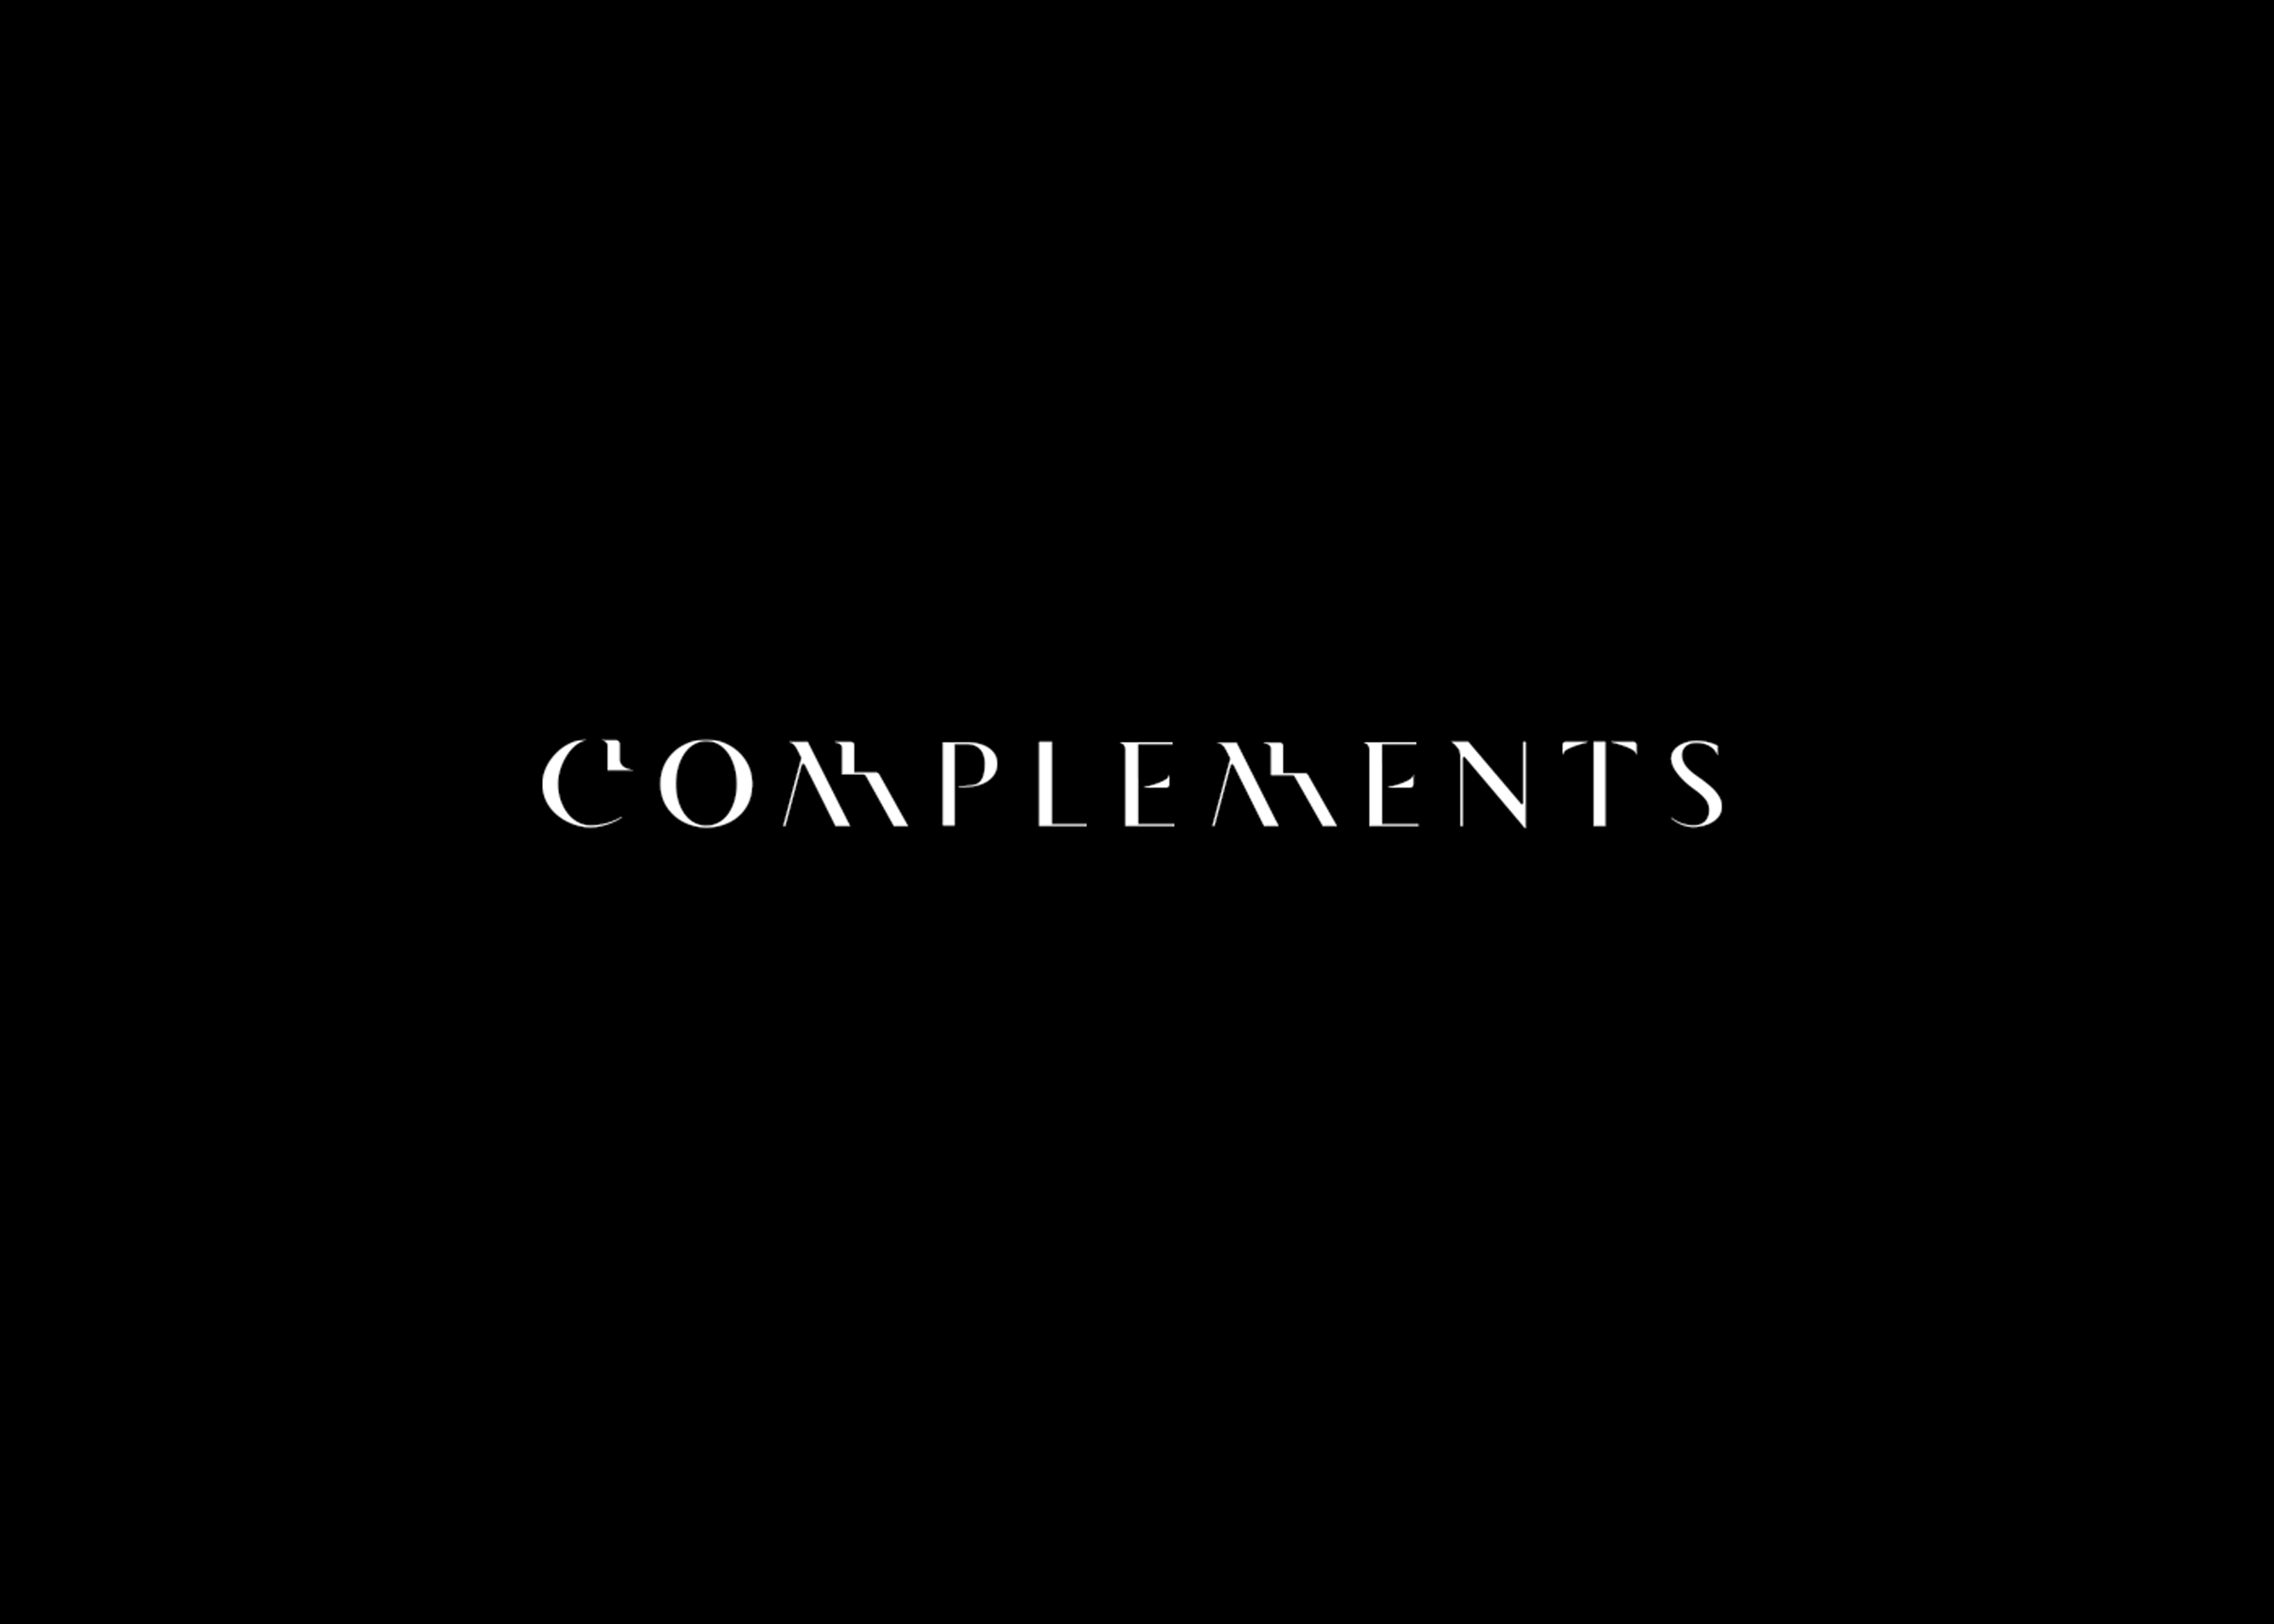 complements_logo